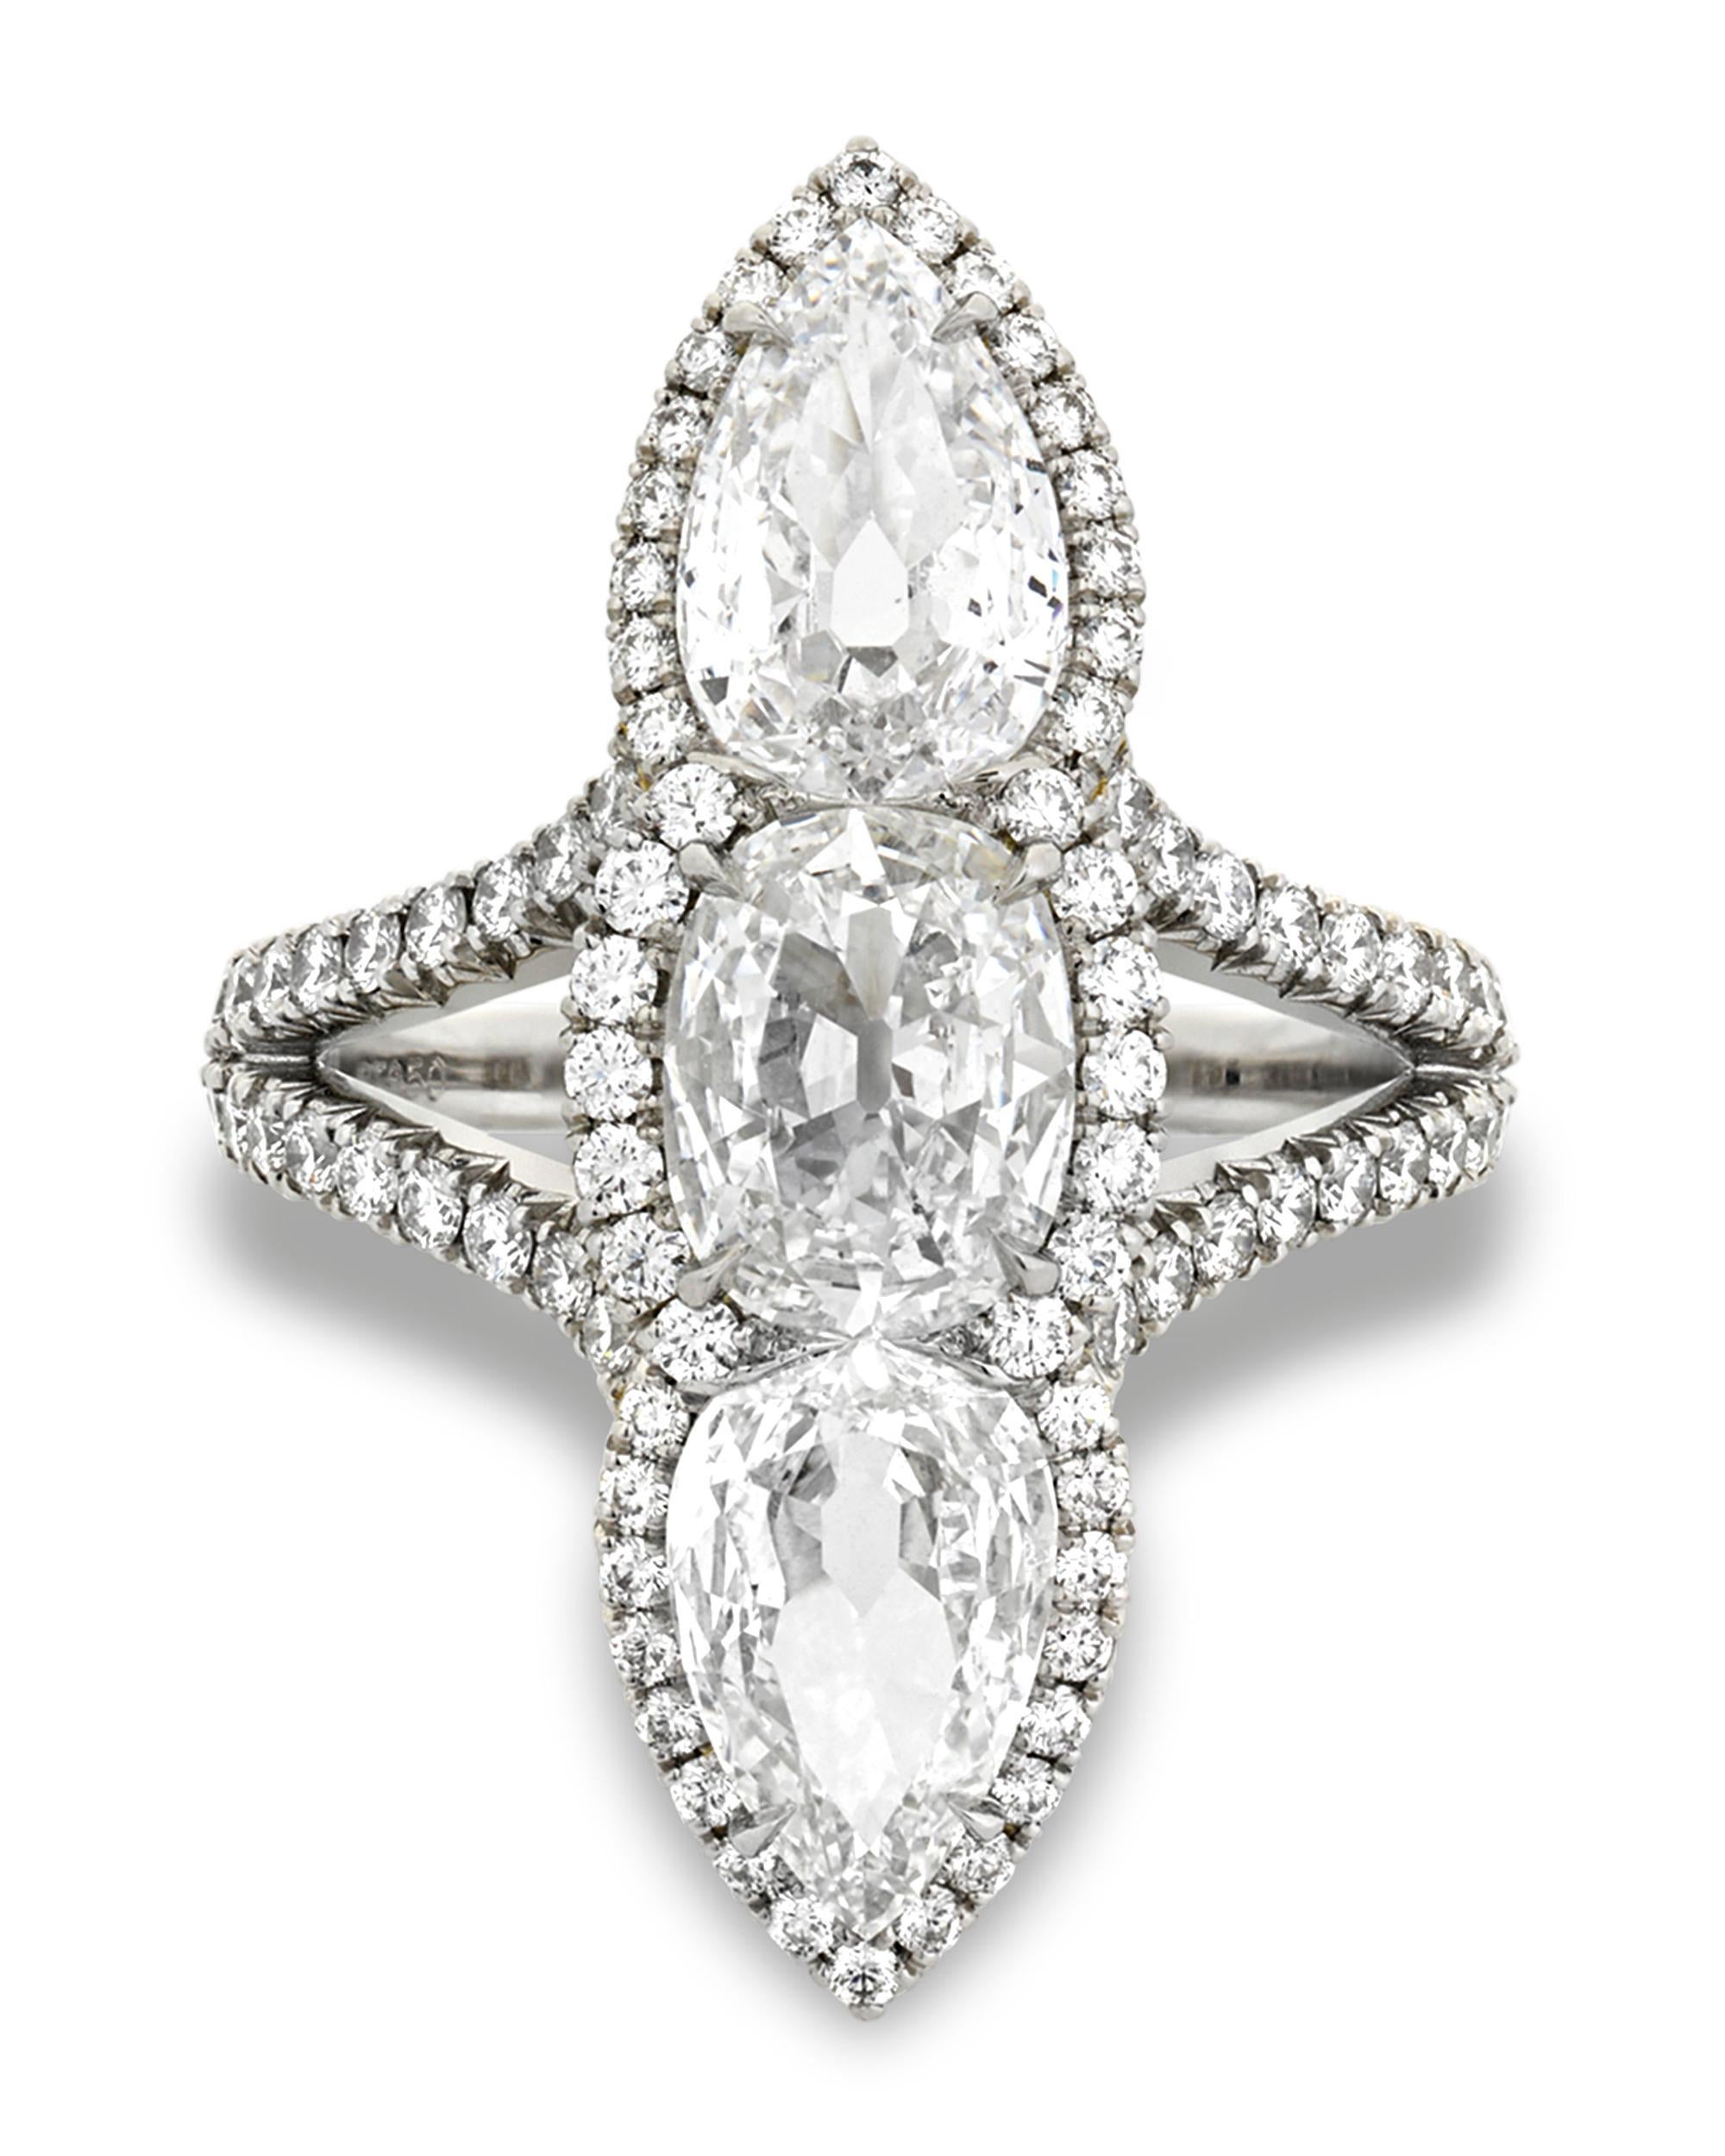 Three incredible, certified white diamonds totaling 3.04 carats are simply radiant in this three-stone North-South ring. The cushion-shaped center stone weighs 1.06 carats and displays a D color with VS2 clarity. The pear-shaped diamonds weigh a